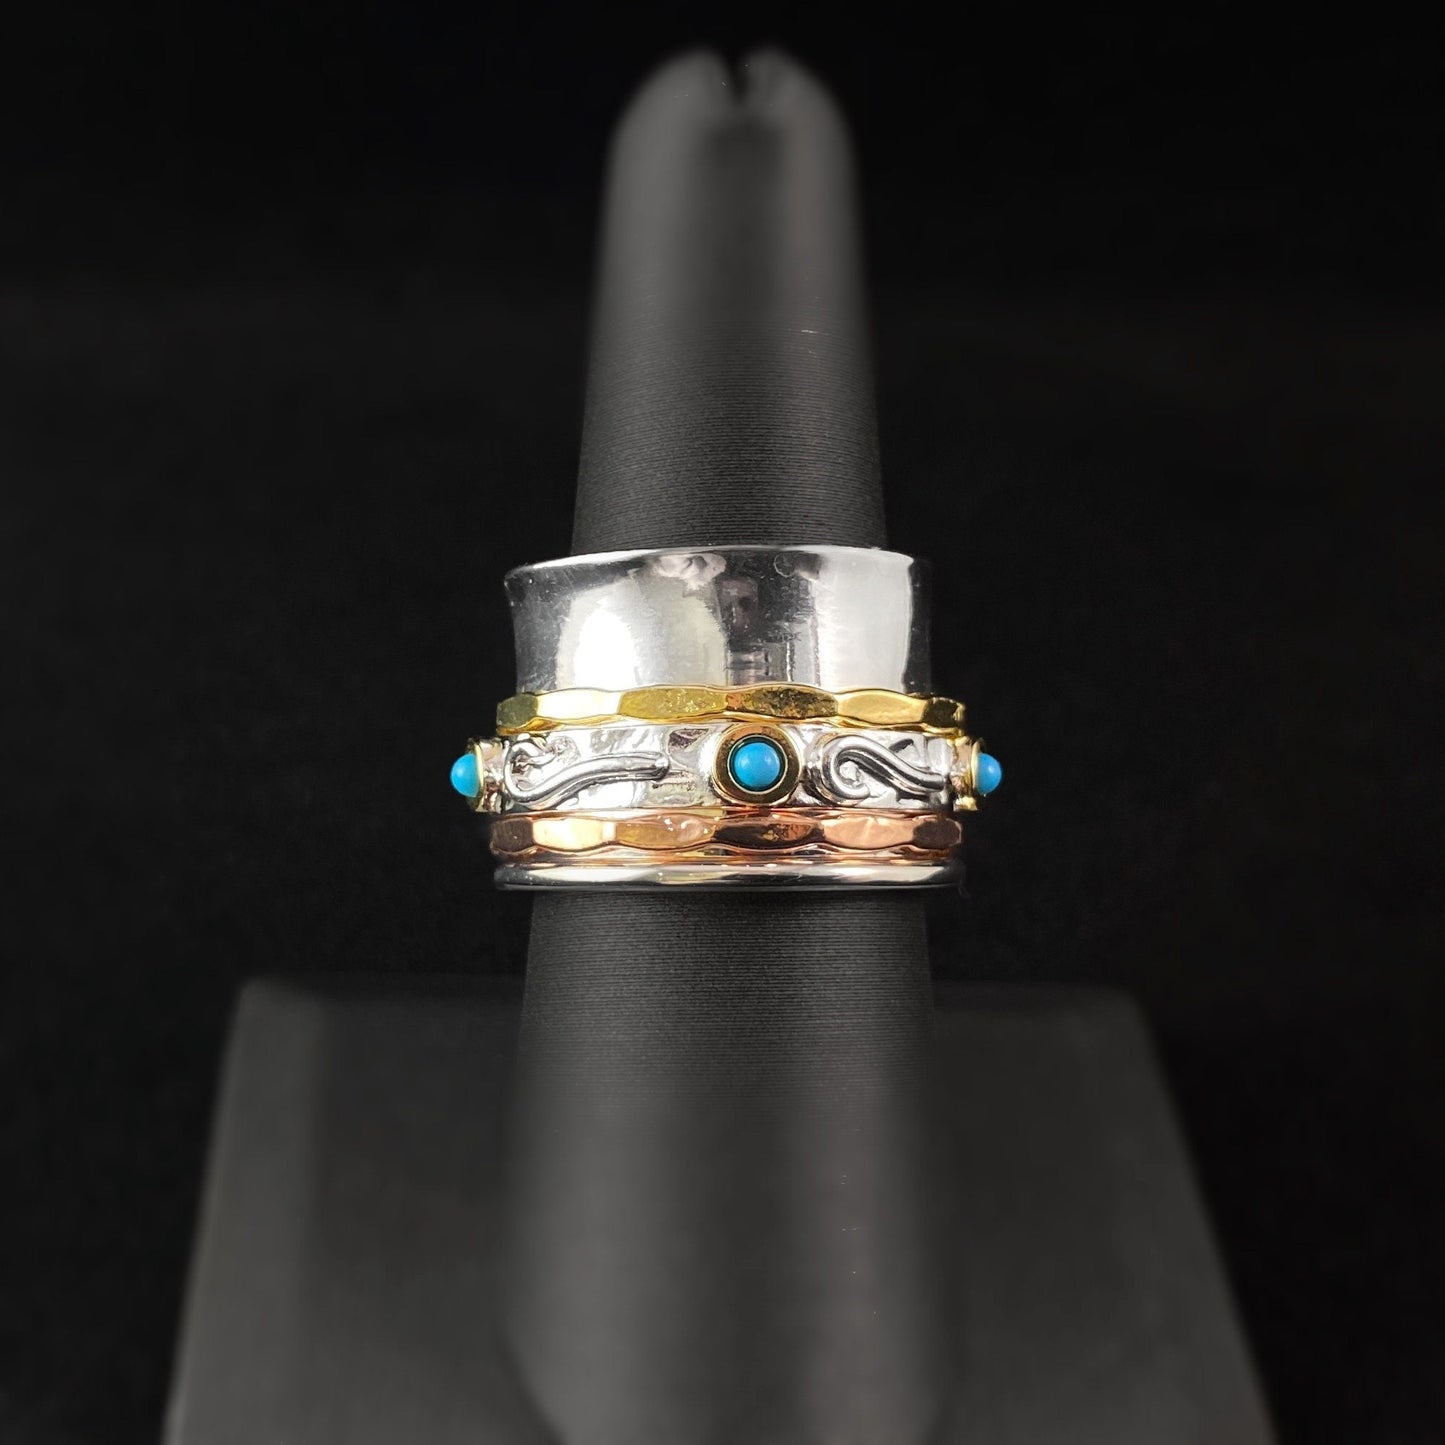 Tri-Color Fidget Ring with Turquoise Stones, 14k Gold Plated and Rose Gold Spinners, and Sterling Silver Plated Detailing, Size 8